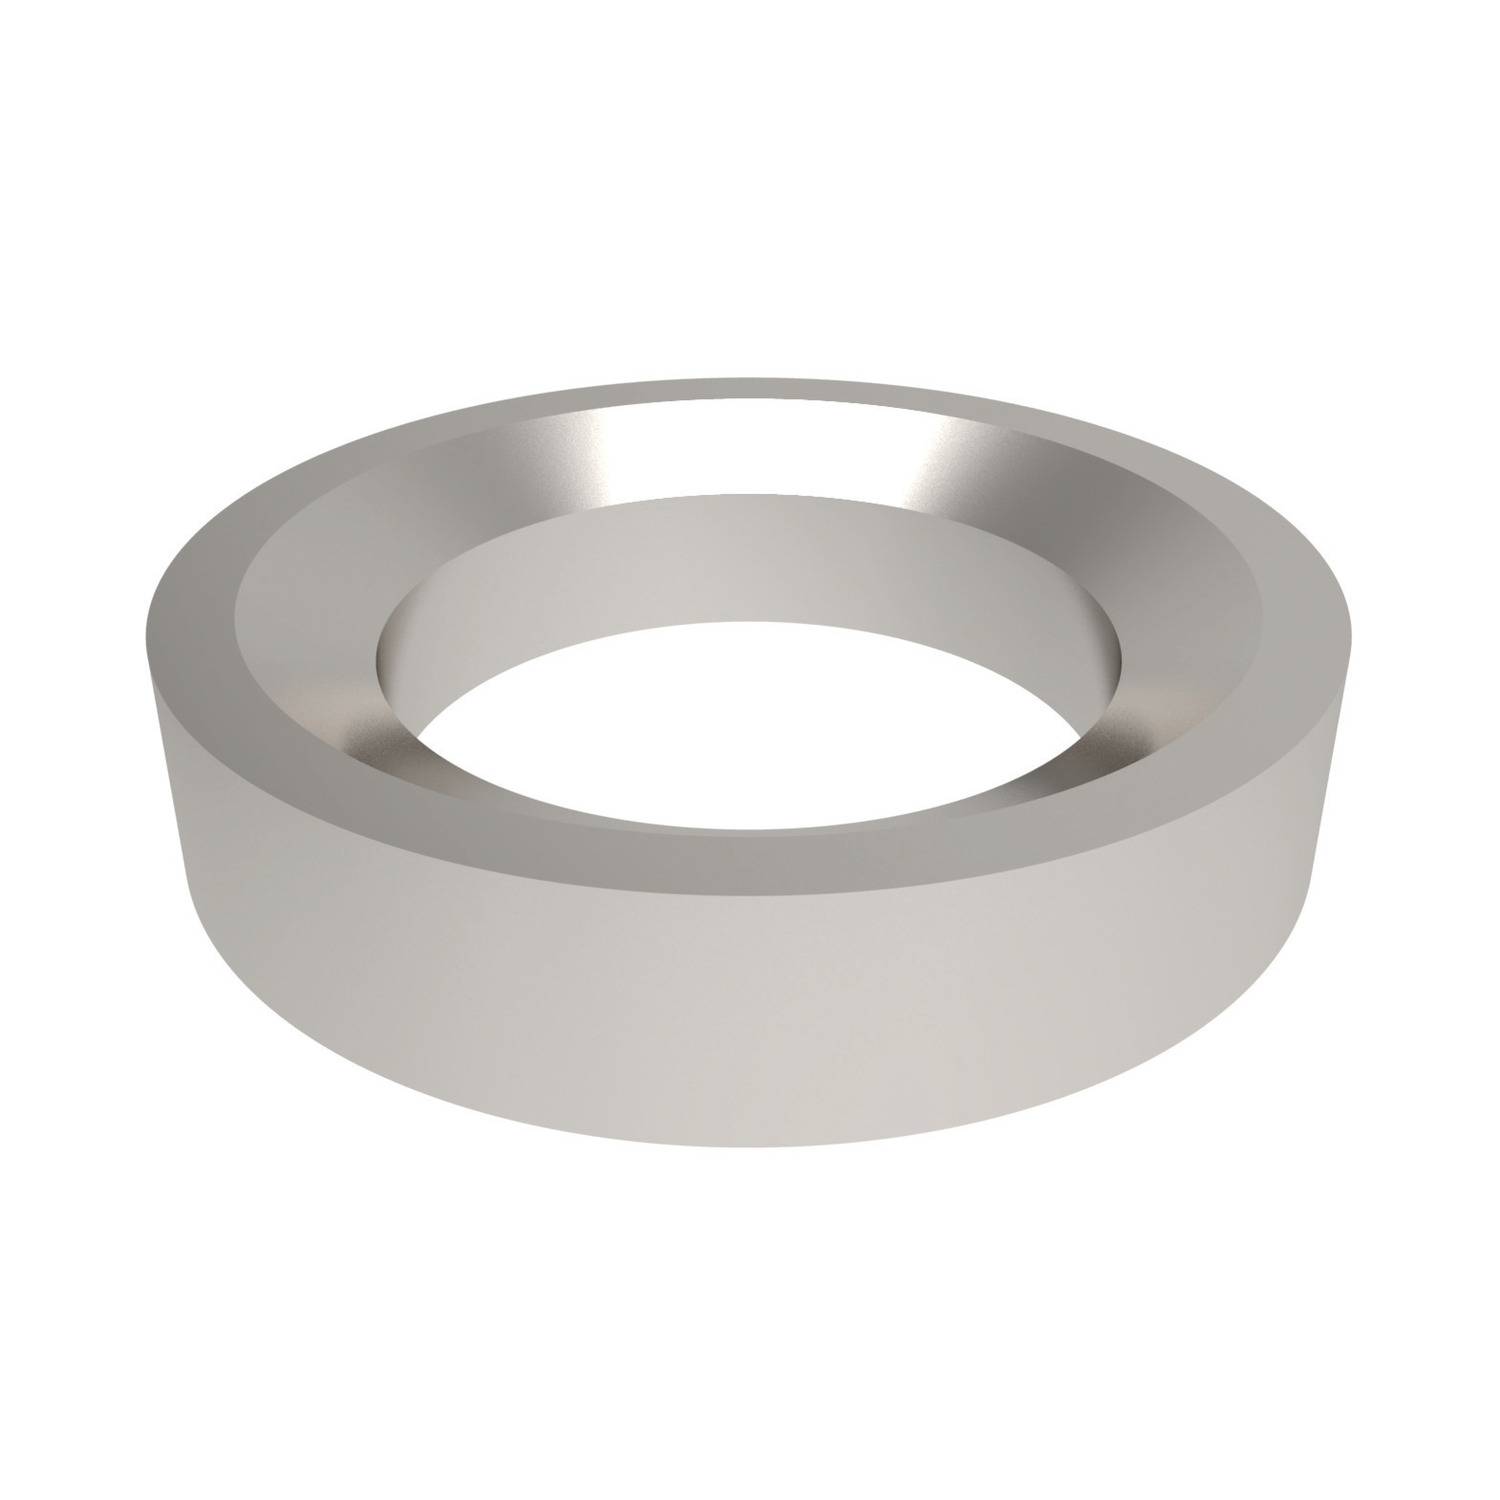 Dished Washers Type D dished washers in stainless are used in conjunction with seat washers and used when clamping forces need to compensate for uneven surfaces.